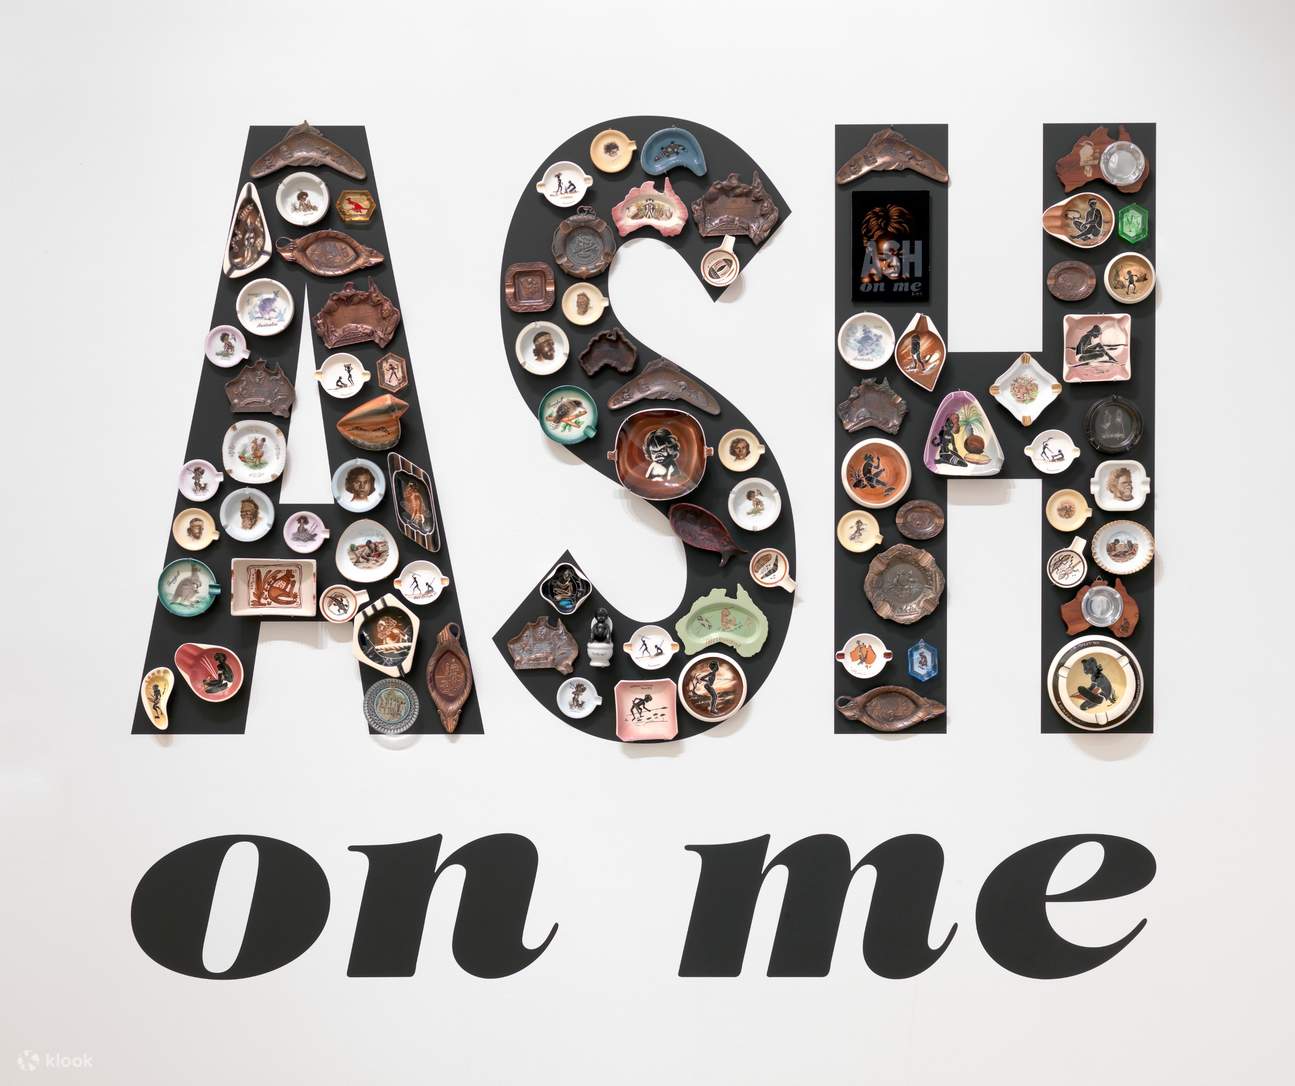 Ash on me exhibition national gallery singapore